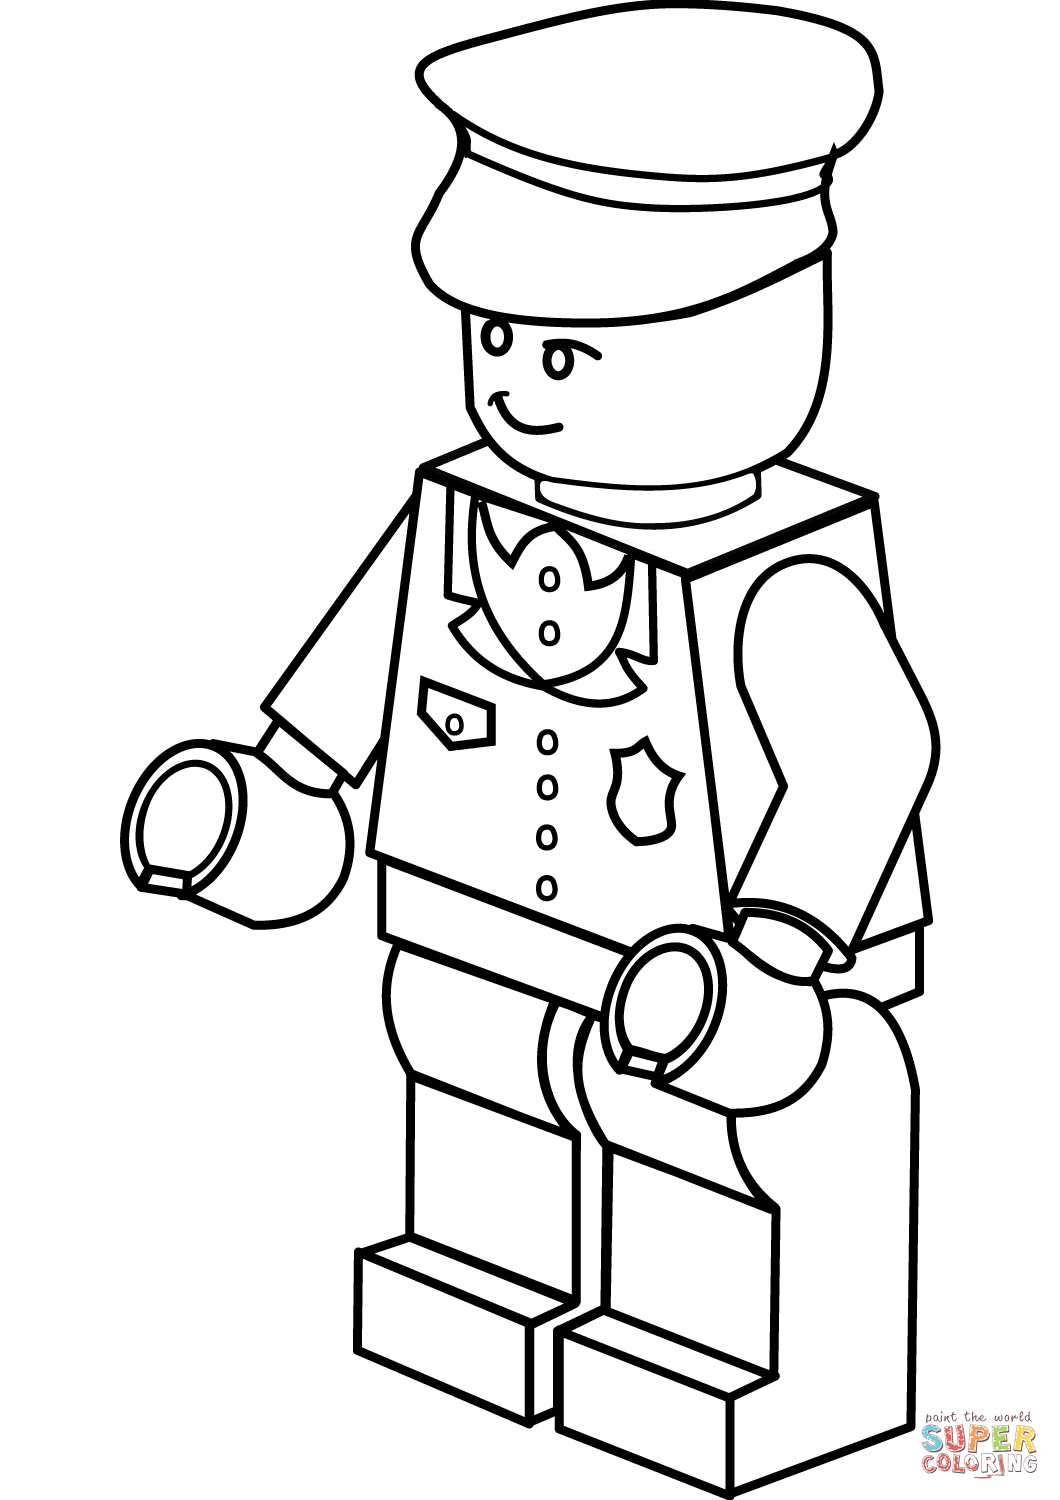 Law Enforcement Coloring Pages at GetColorings.com | Free printable